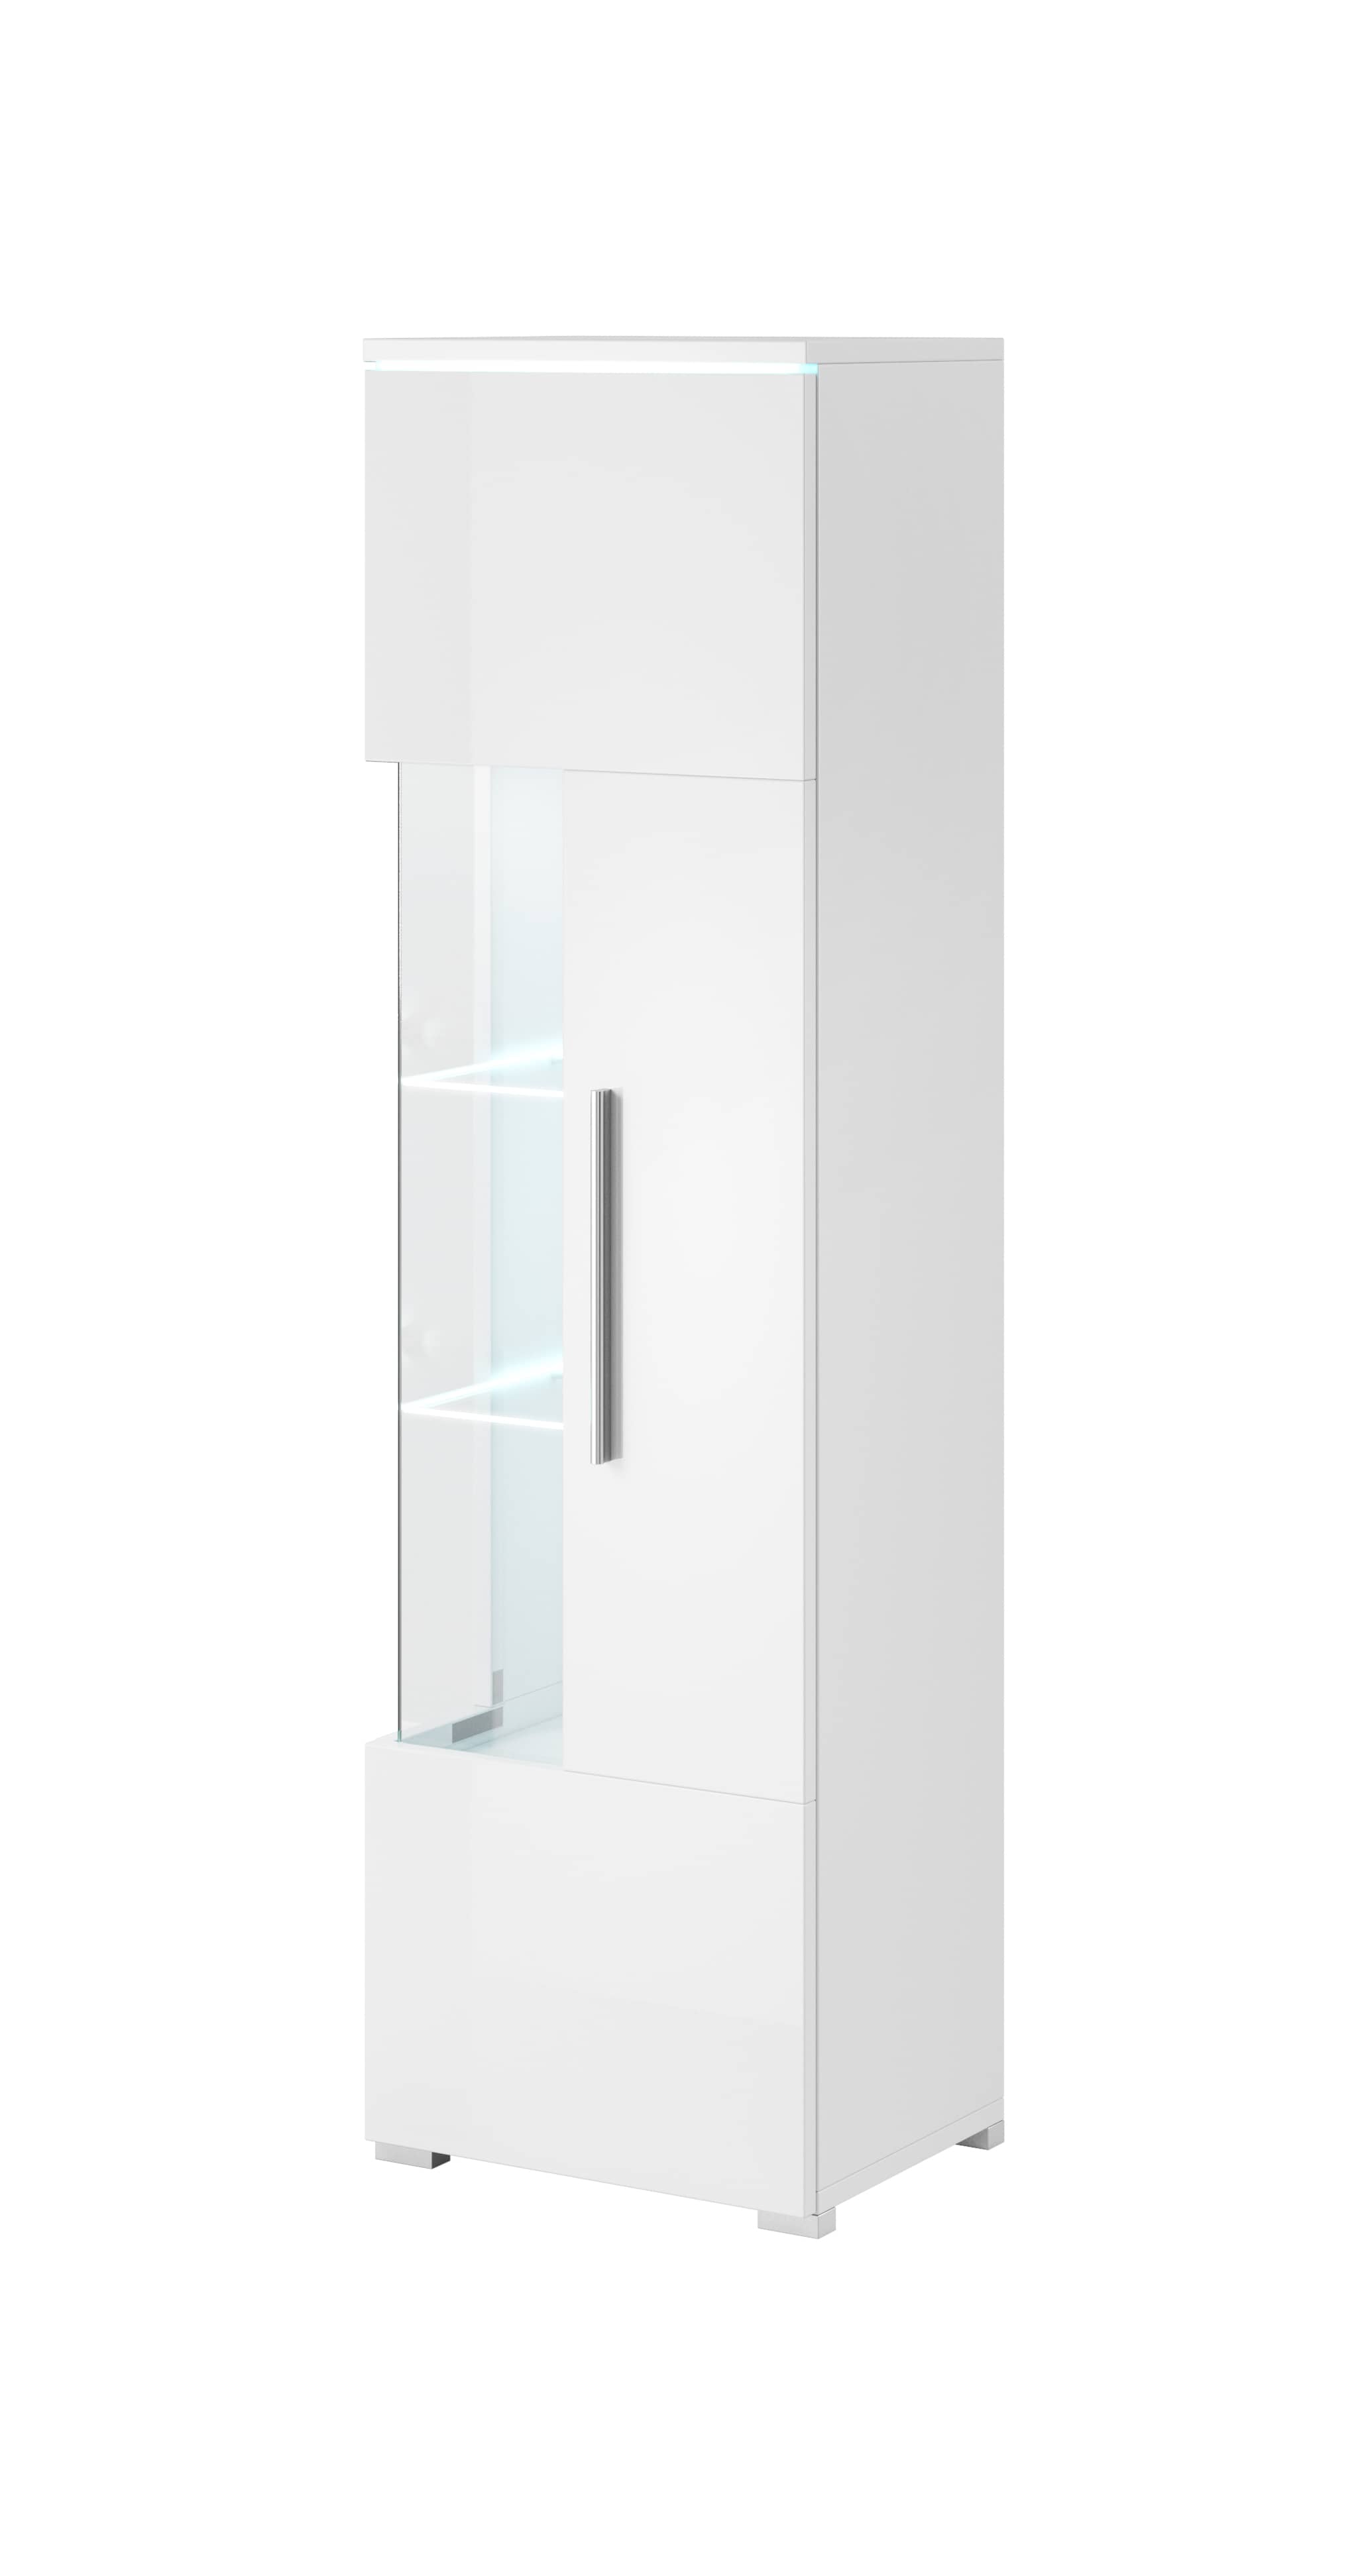 View India 06 Tall Display Cabinet 45cm White information